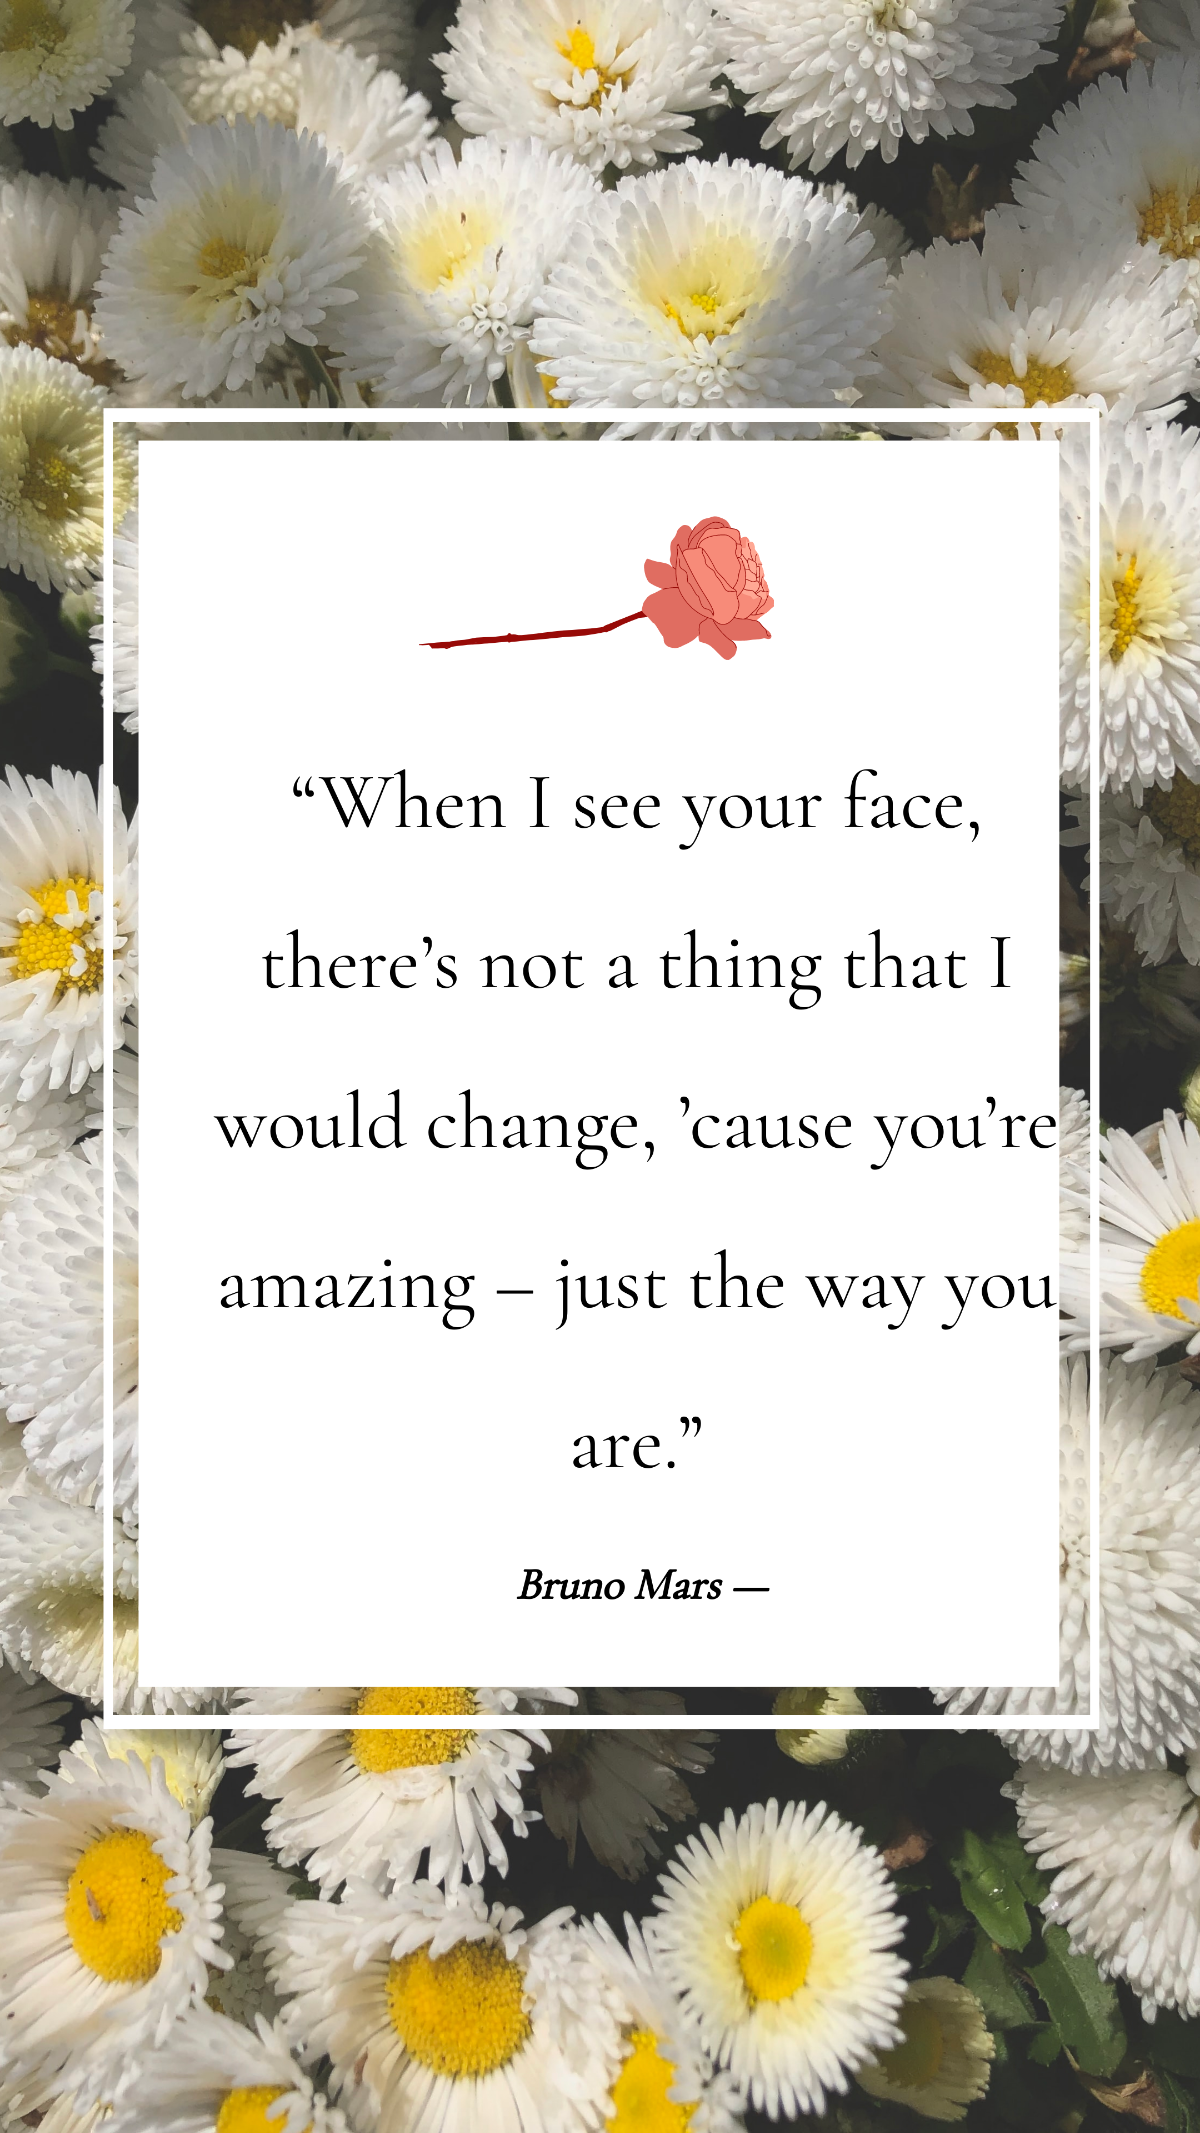 Bruno Mars — “When I see your face, there’s not a thing that I would change, ’cause you’re amazing – just the way you are.”